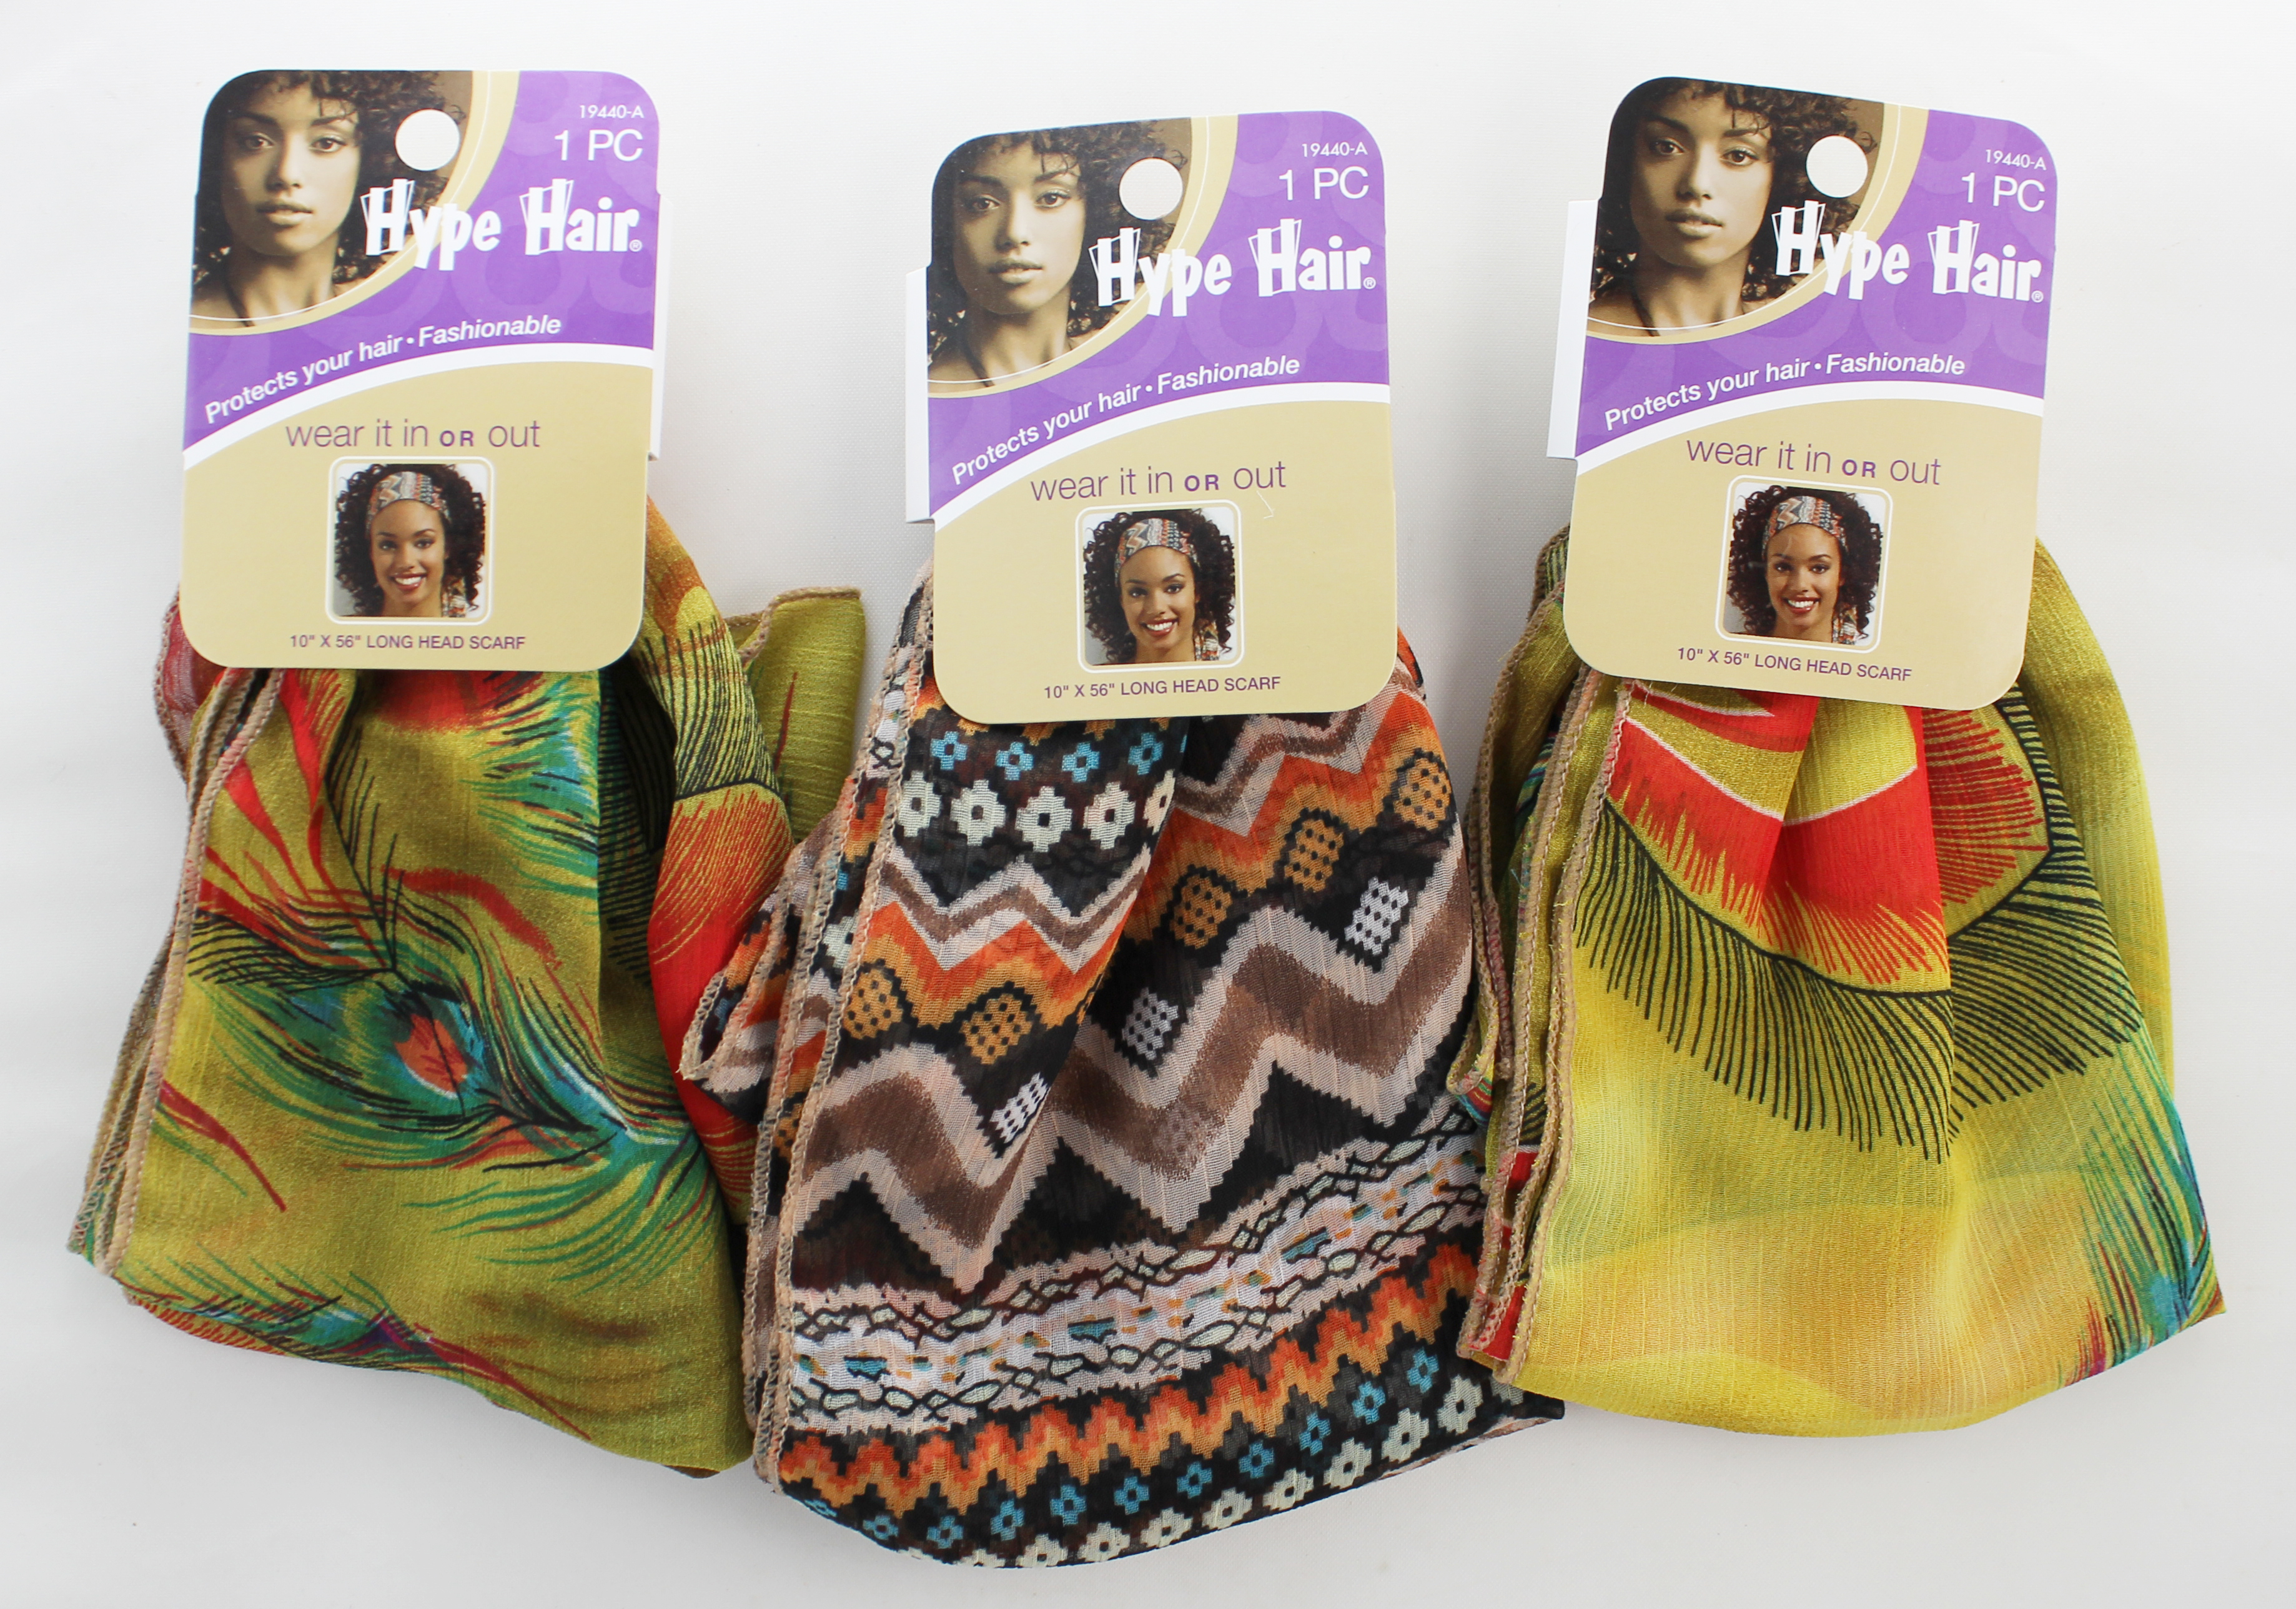 Conair Hype Hair Long Head Scarf 10" X 56" (Sold in Pack of 3)